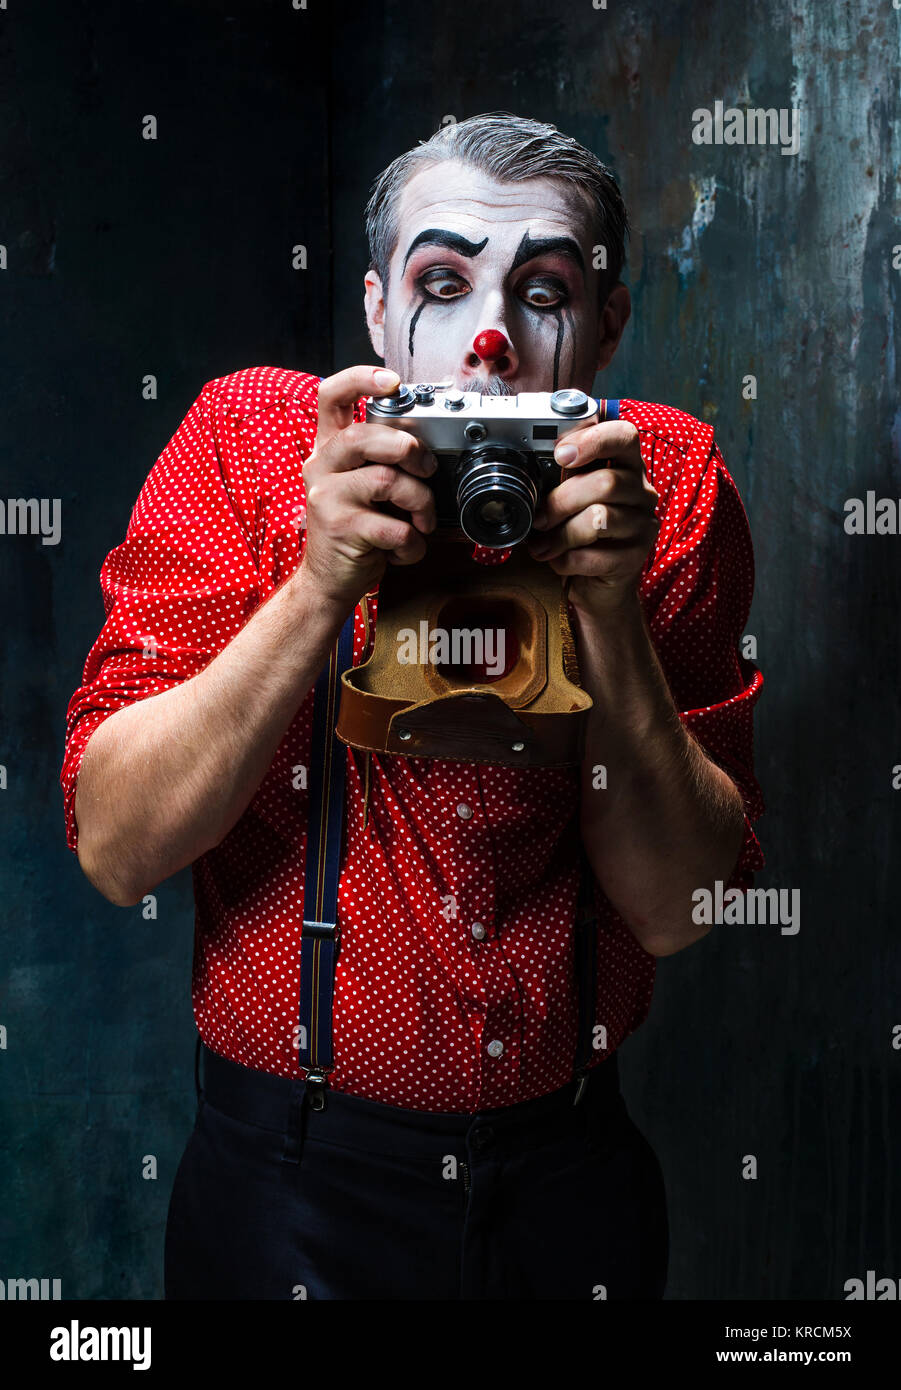 The scary clown and a camera on dack background. Halloween concept Stock Photo